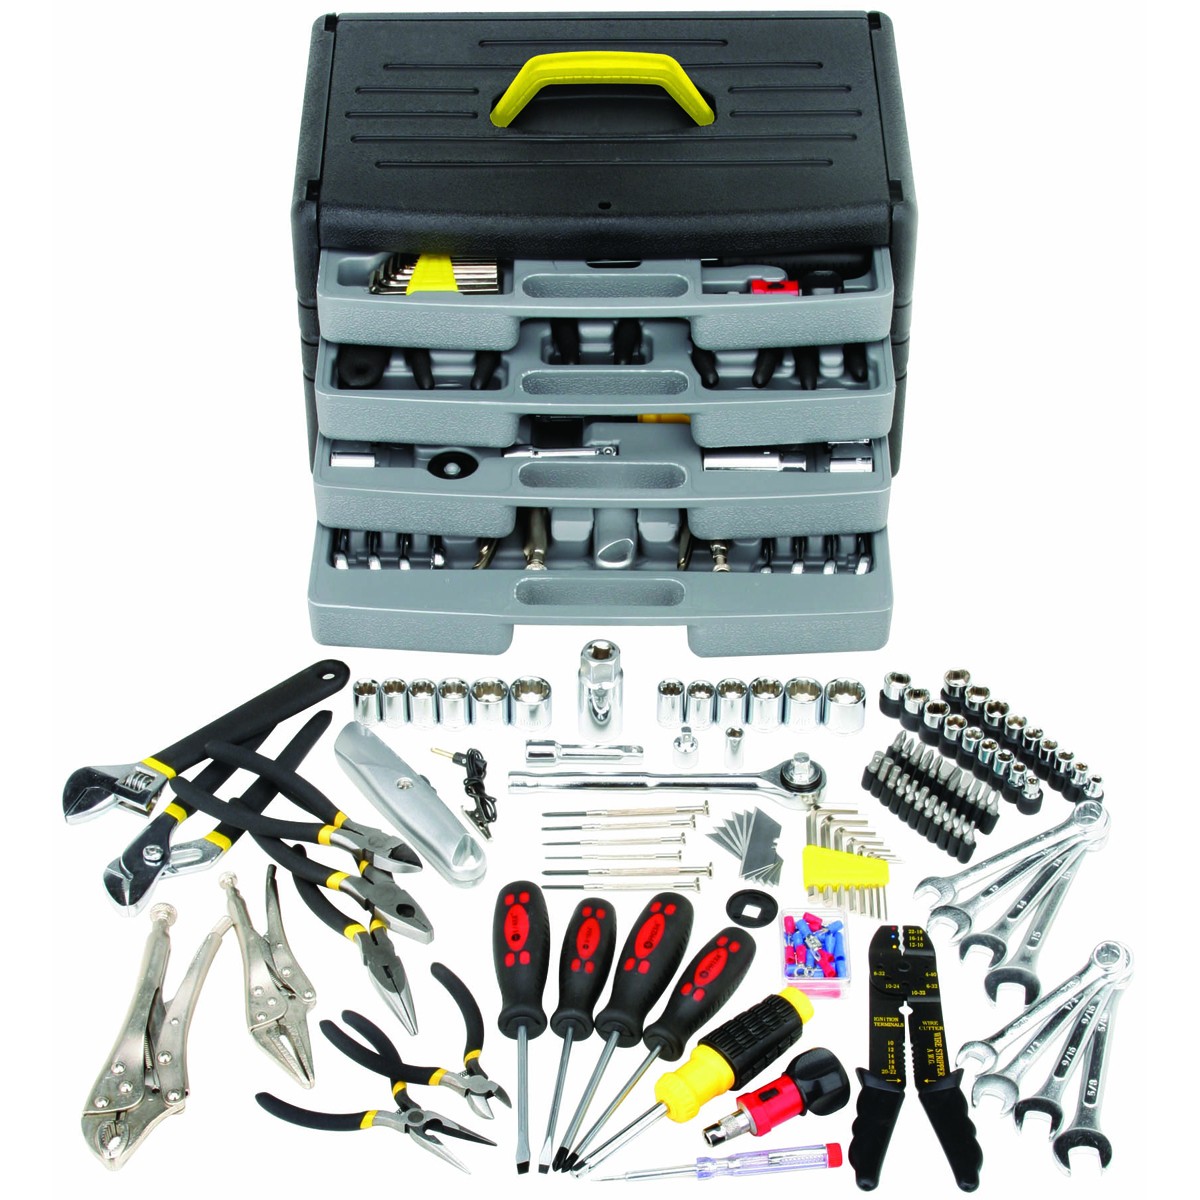 New   Pittsburgh  105 Piece Tool Kit with 4-Drawer Chest